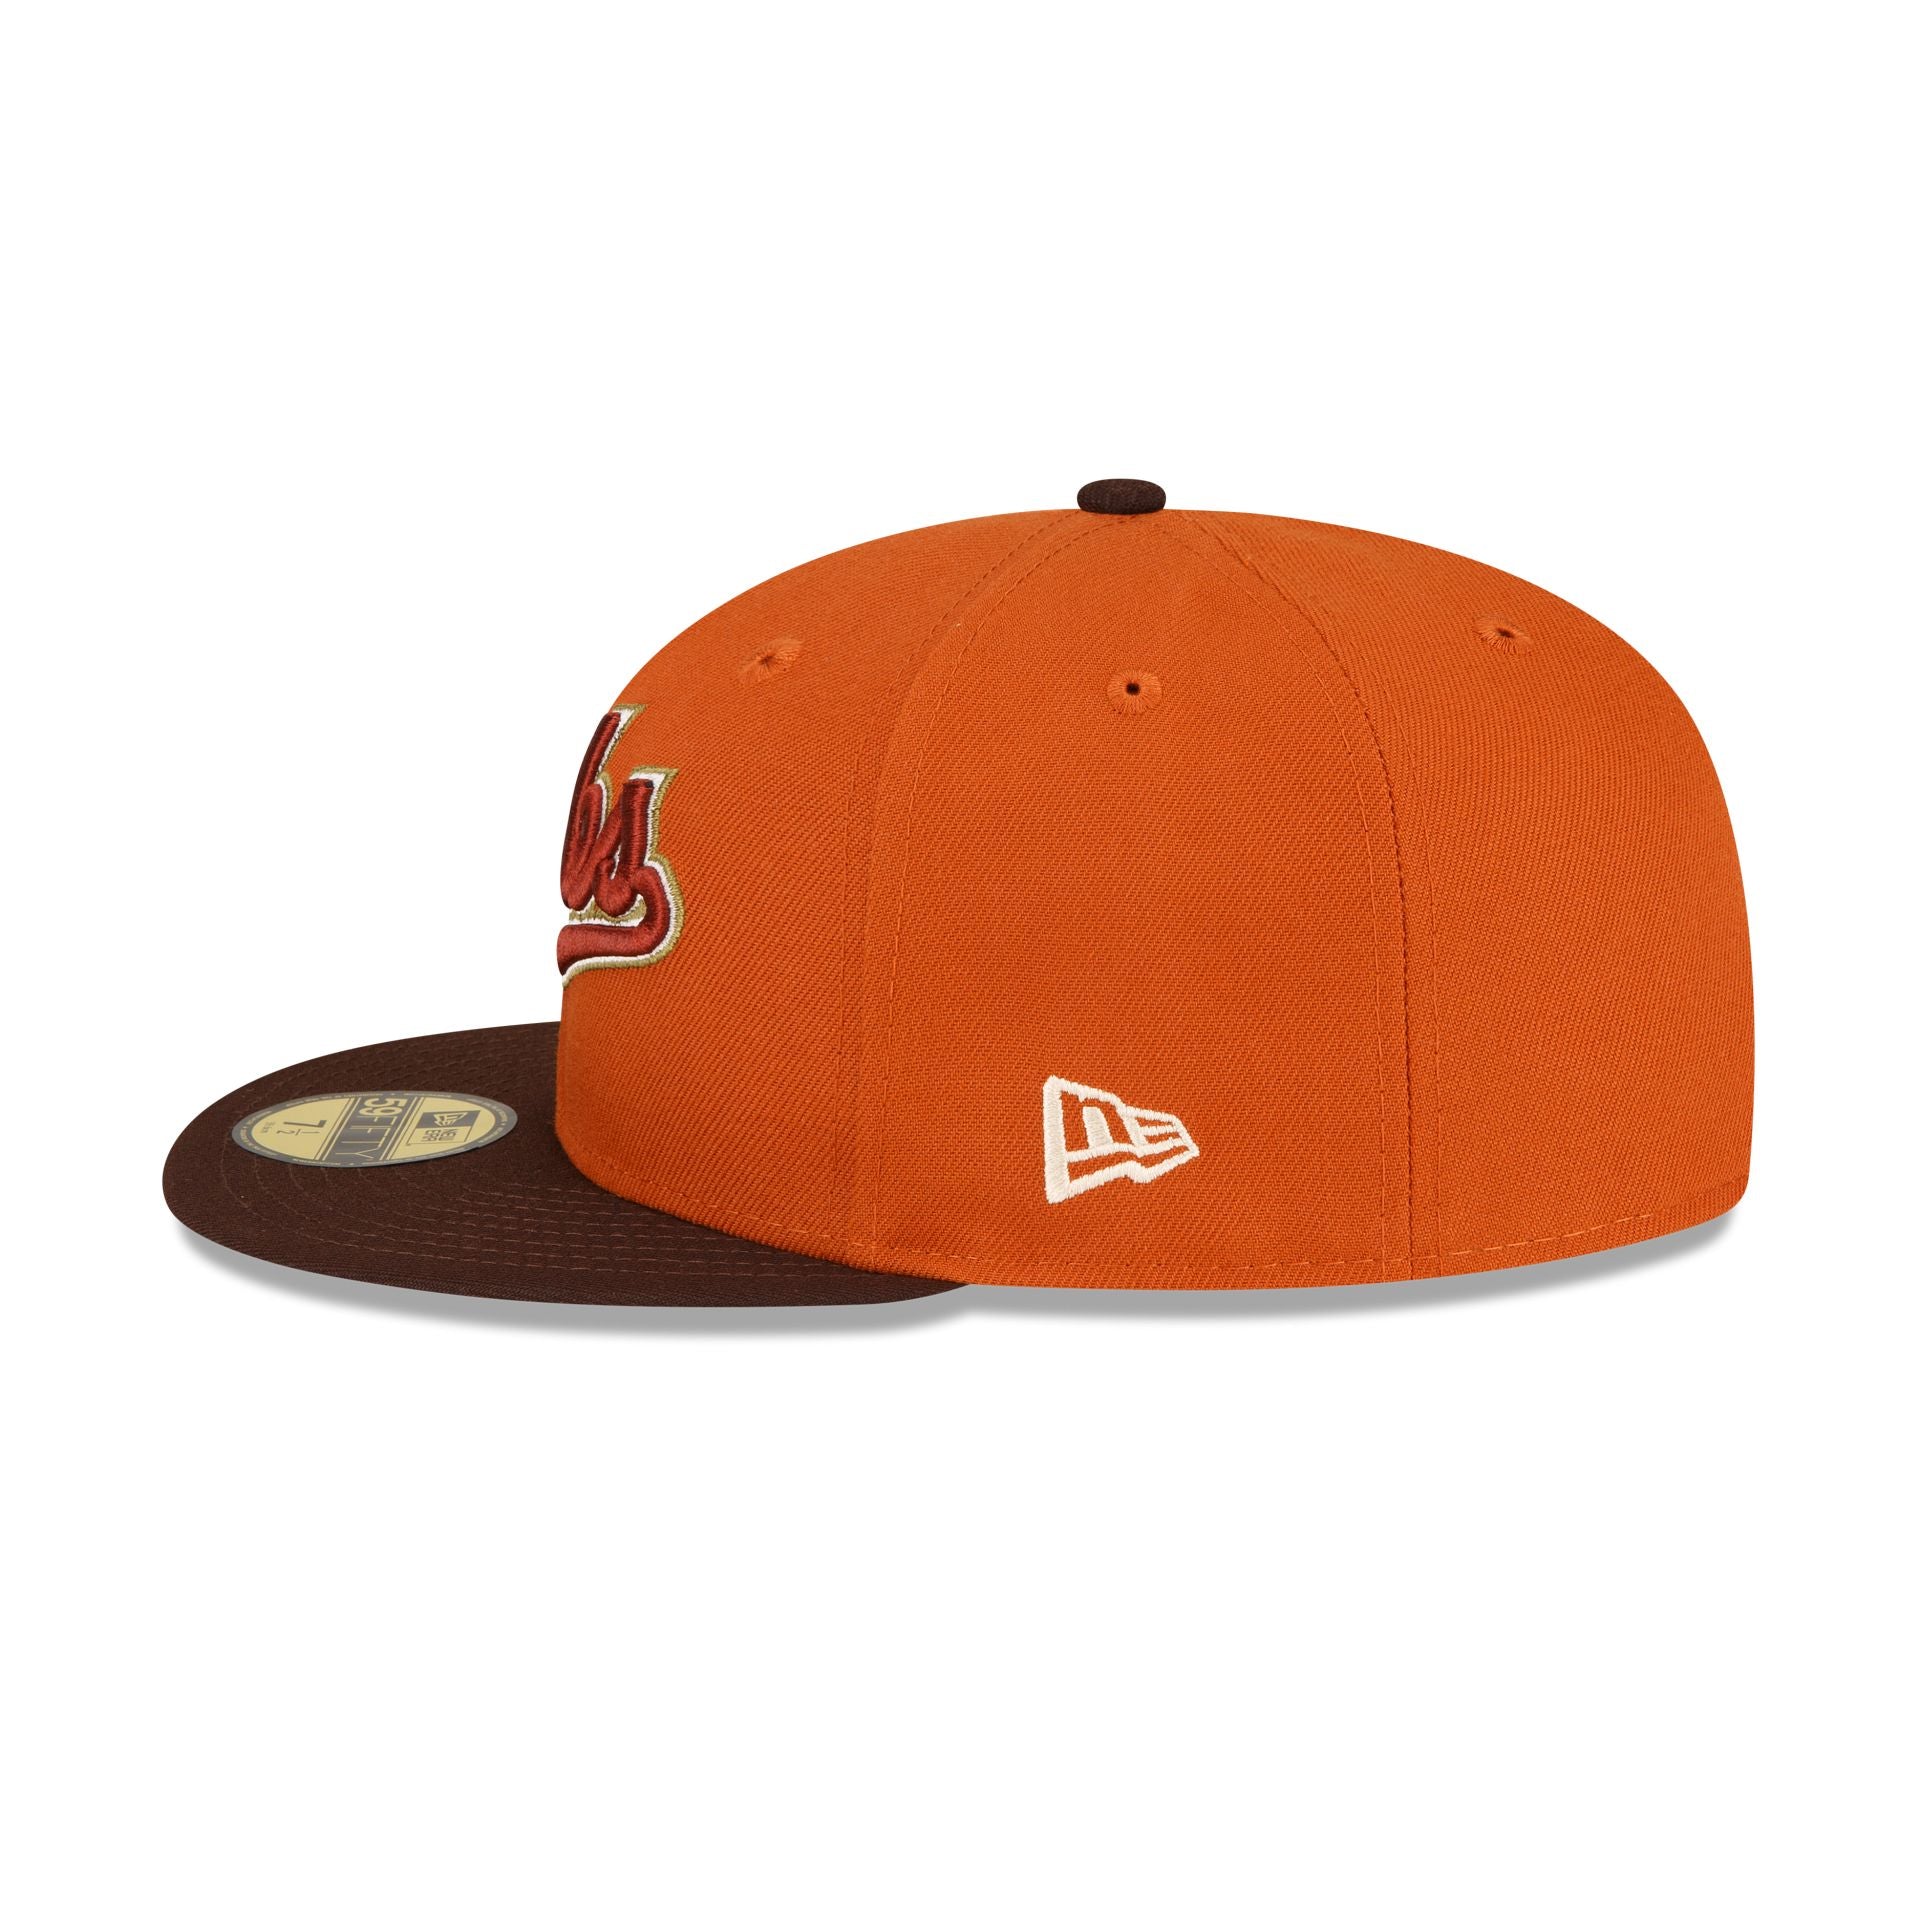 Cap Cubs Hat Caps Fitted 59FIFTY Era Chicago Orange Rust – New Just